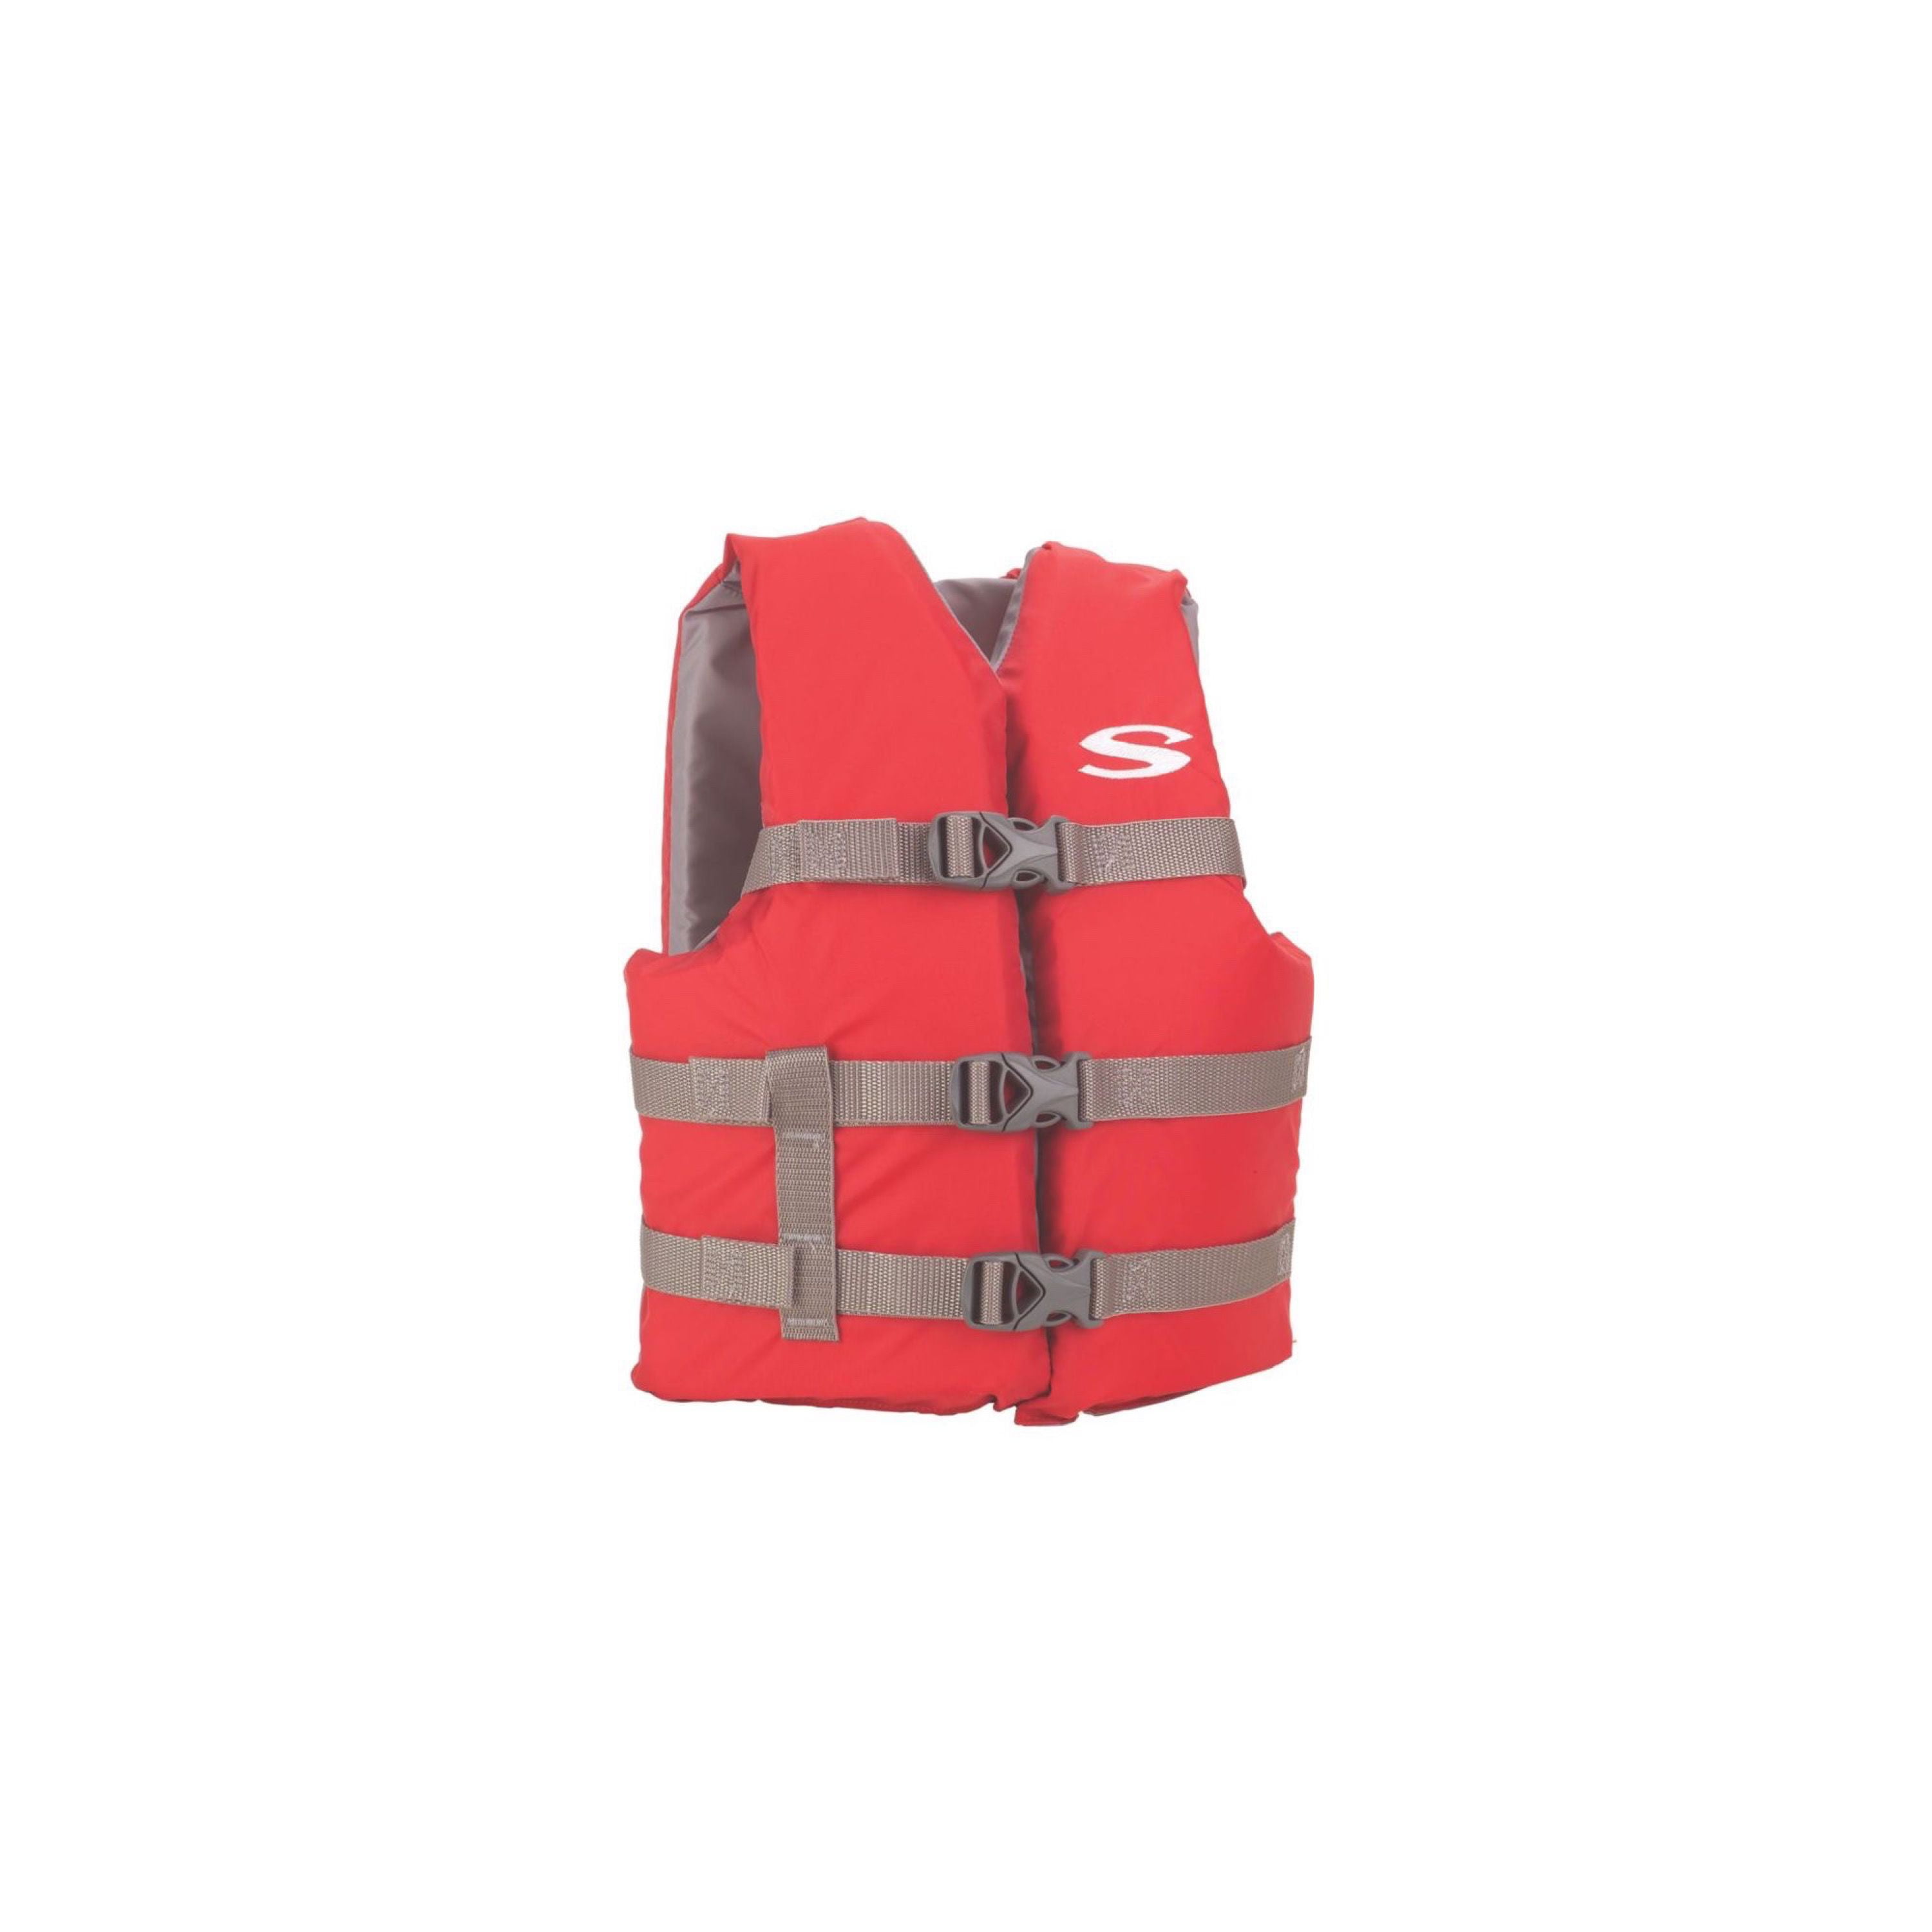 Chest Size 26"-29" Youth Med Stearns Life Vest USCG 50-90 Lbs New! 